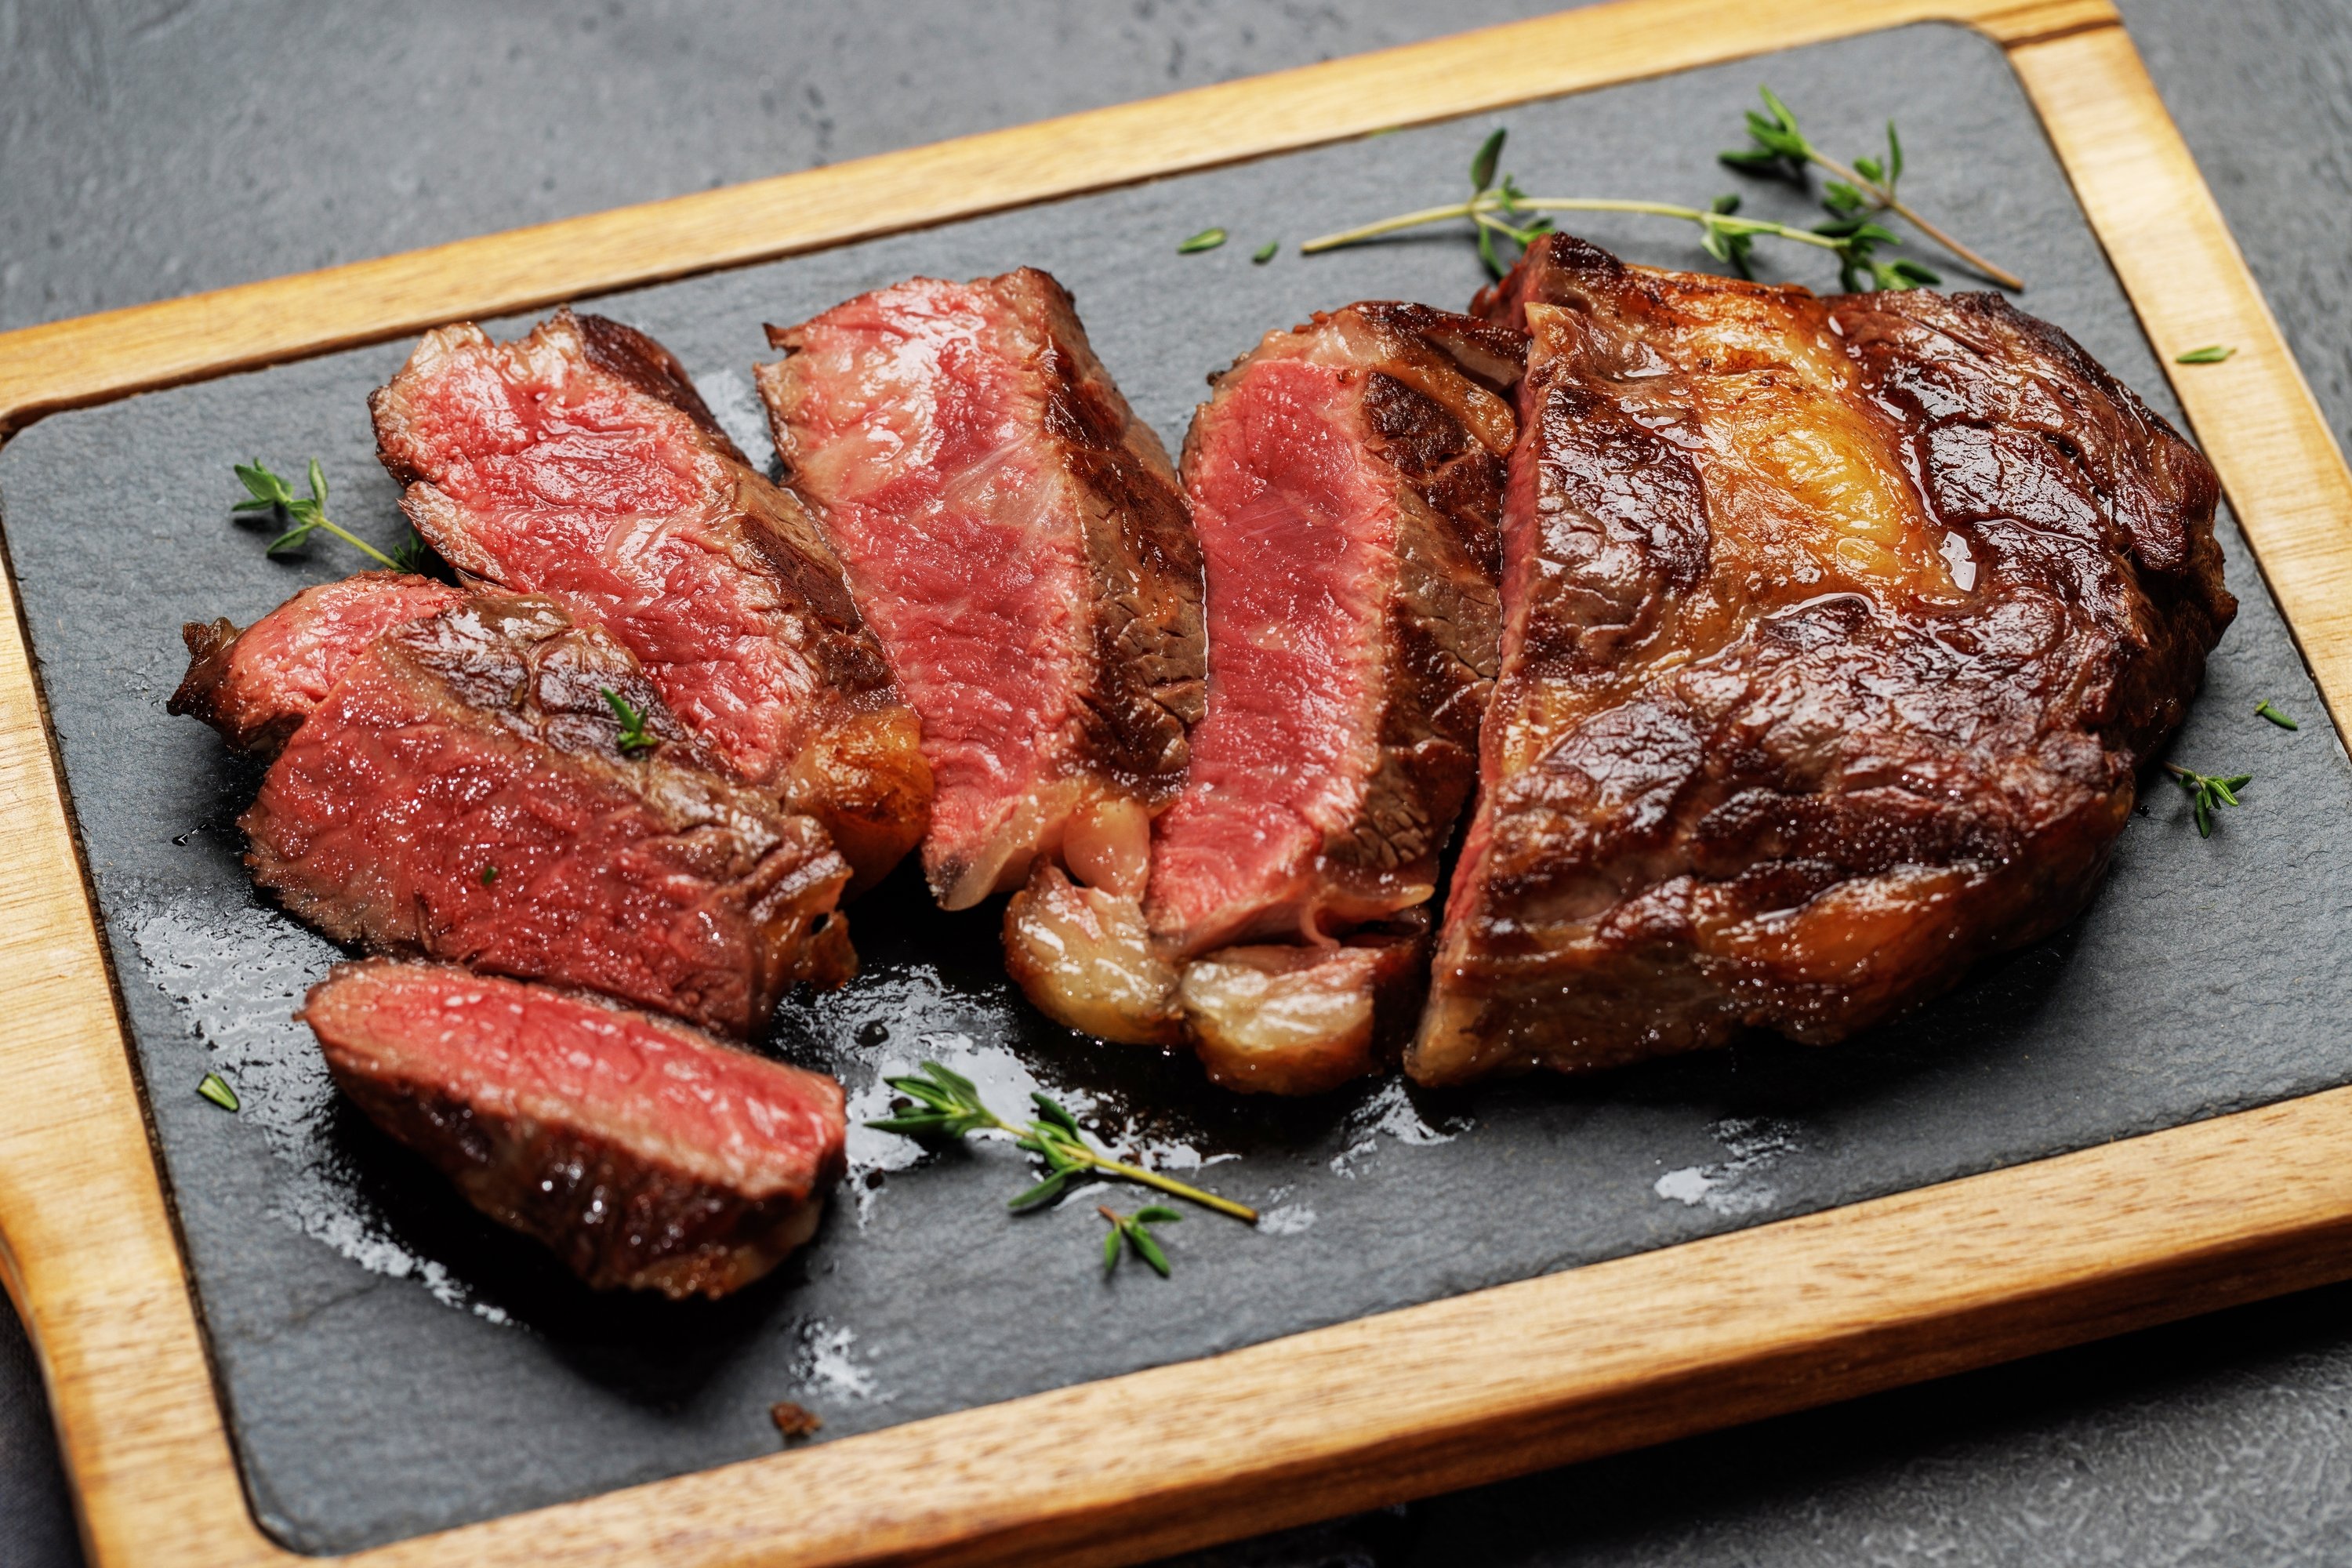 Reverse Sear Method: One of the best Ways to Cook a Steak